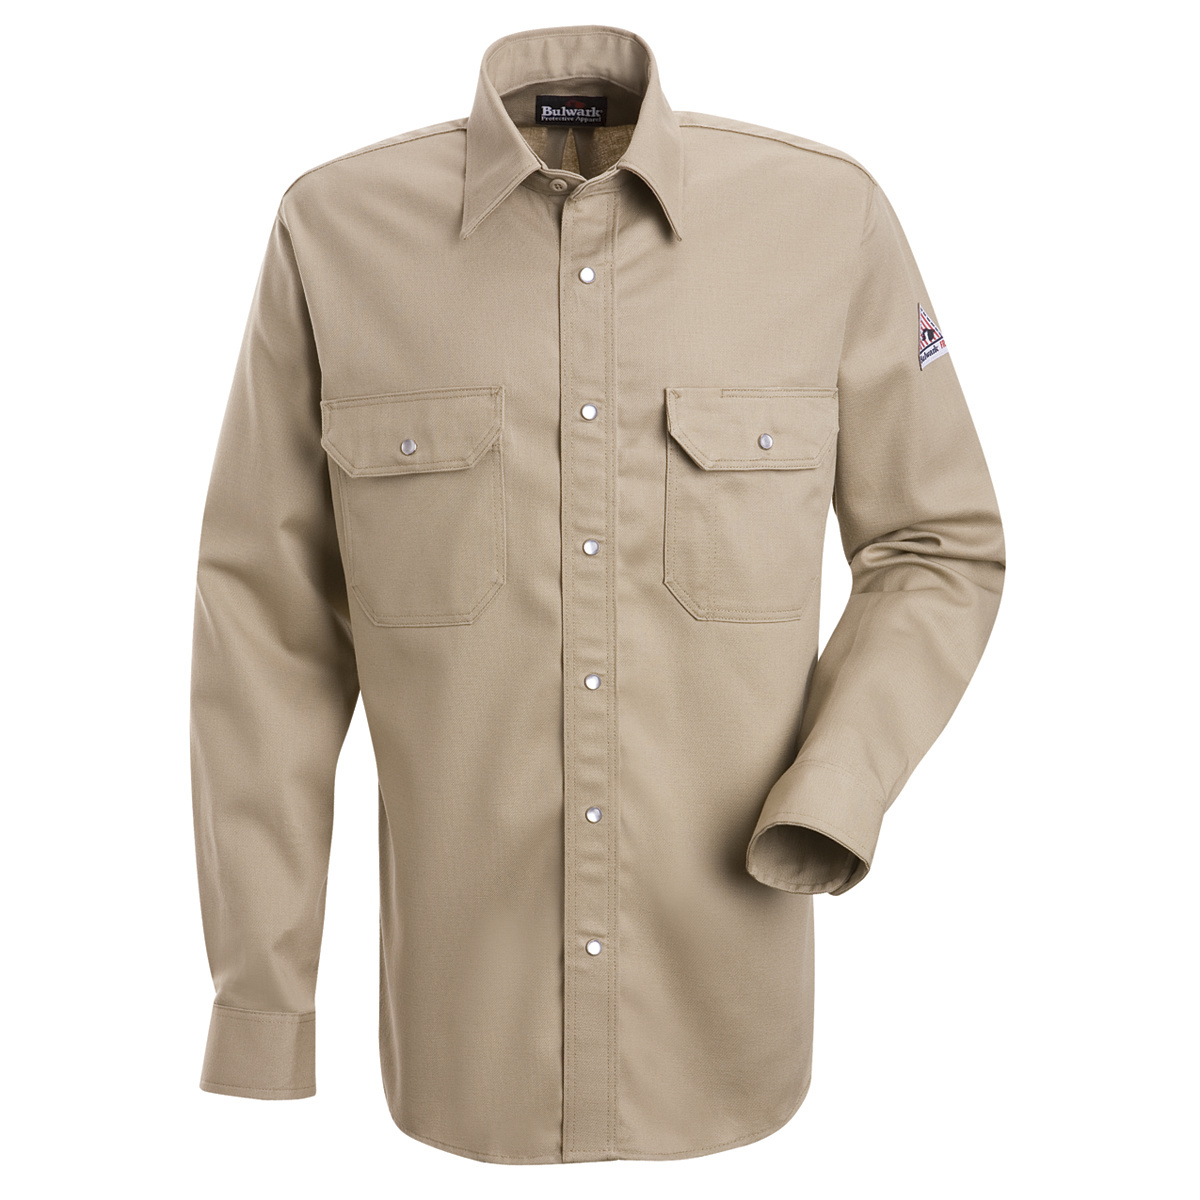 Bulwark® Large Tall Tan EXCEL FR® Cotton Flame Resistant Uniform Shirt With Snap Front Closure